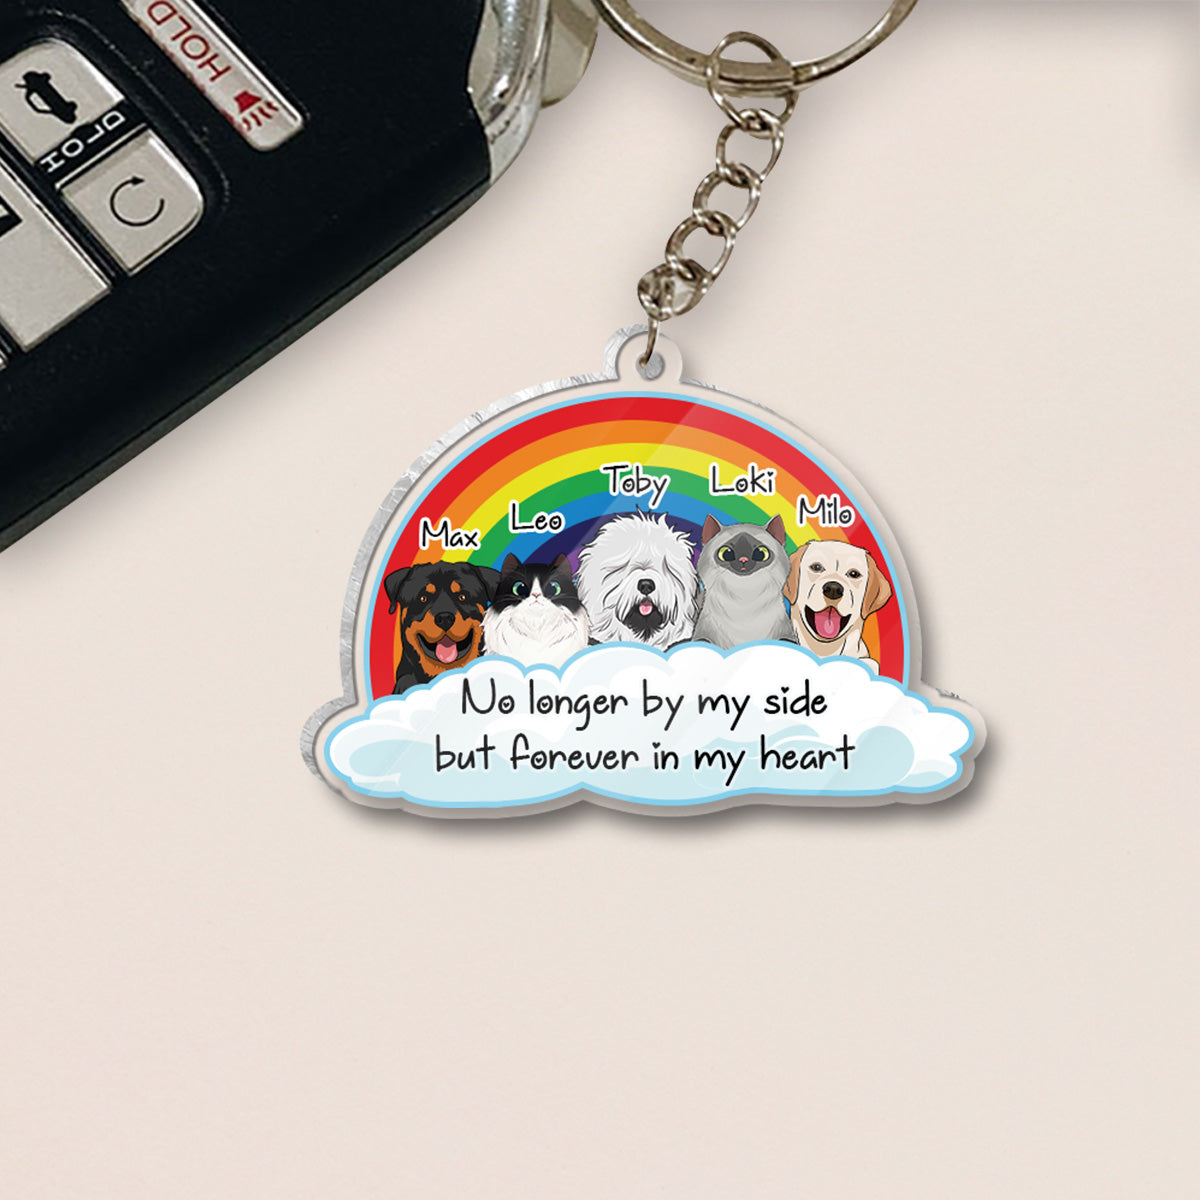 No Longer By My Side - Personalized Dog Keychain (Printed On Both Sides)